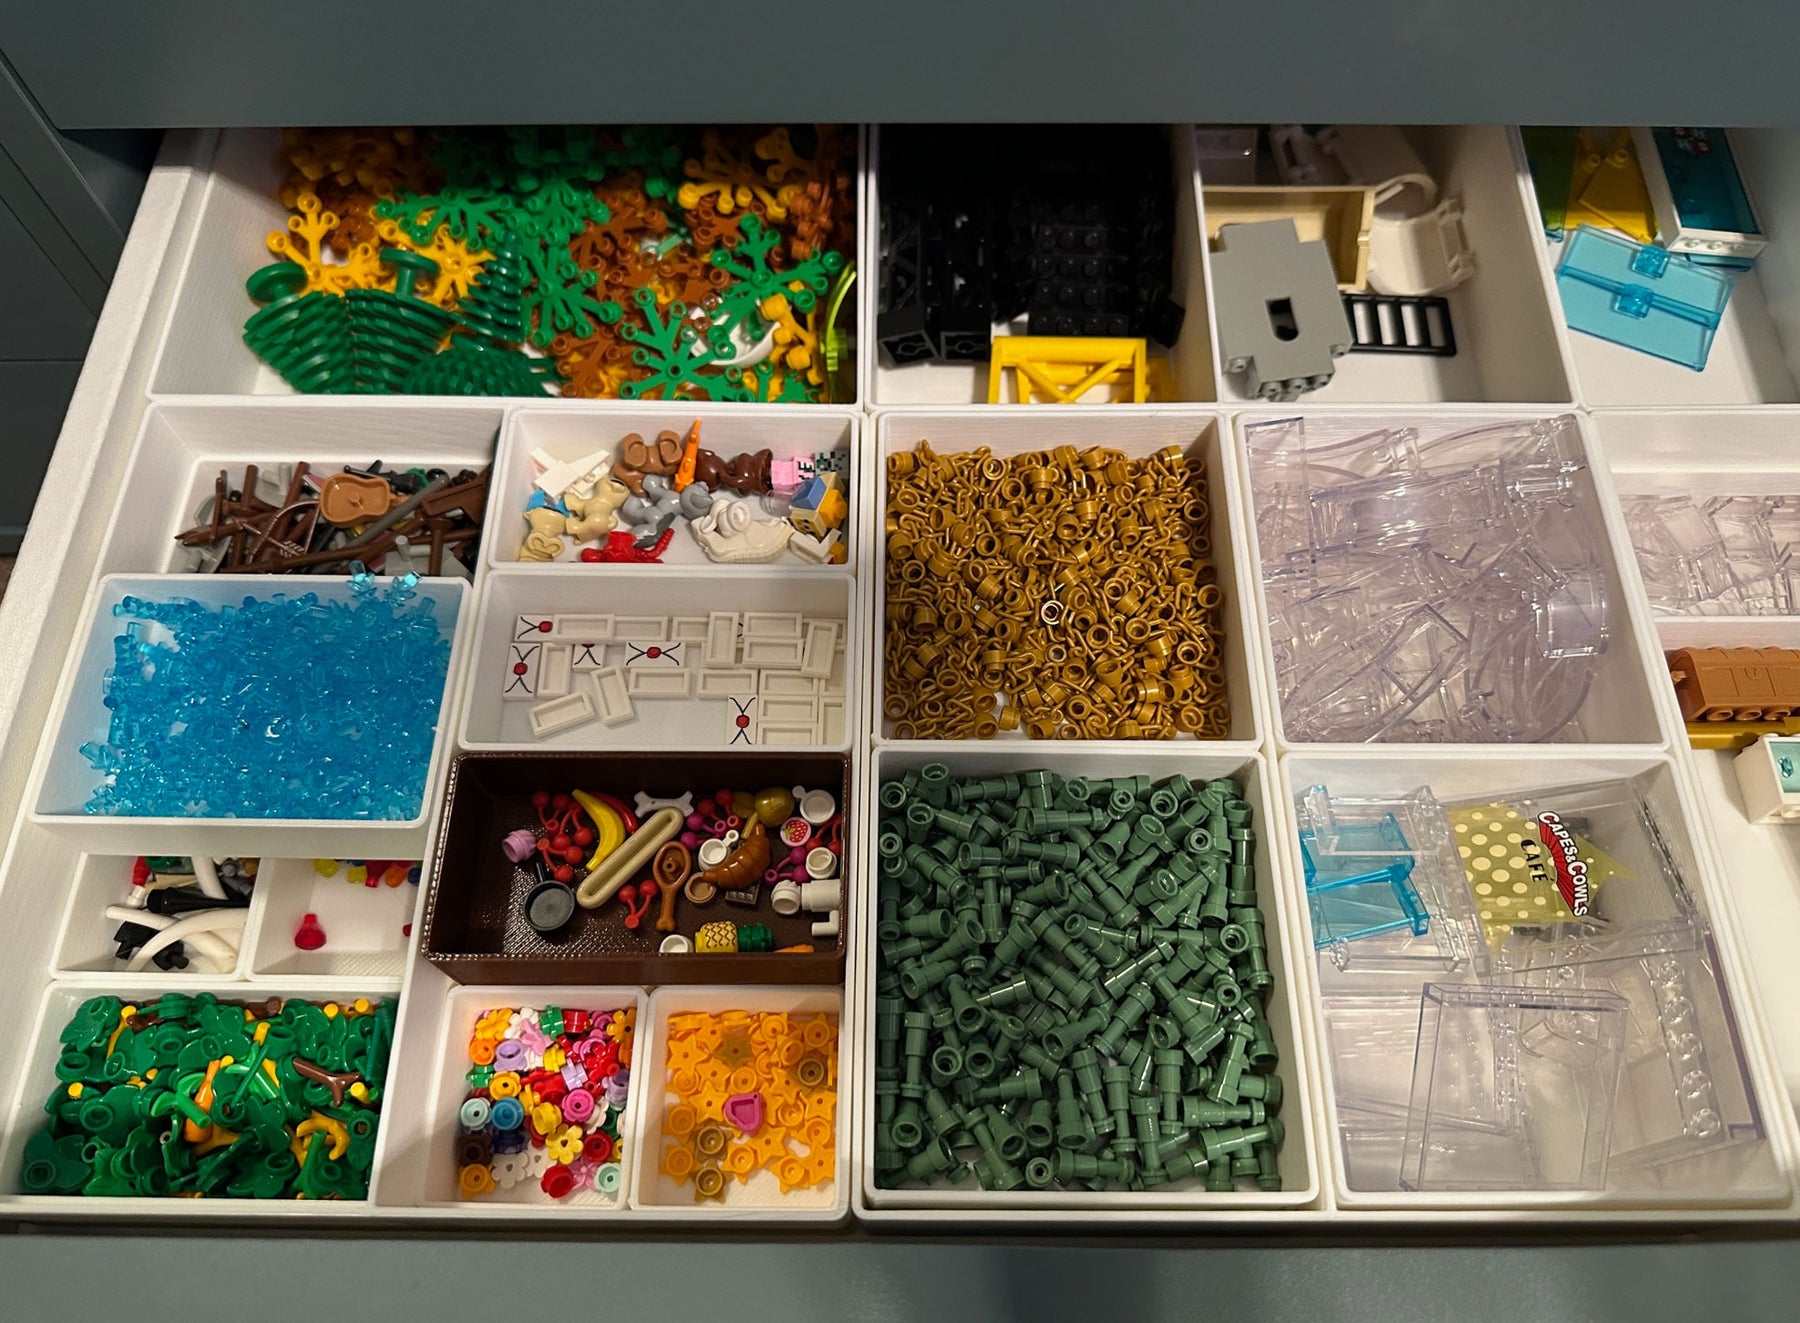 Lego uses these stacked Ikea Alex drawer units for parts storage -- any  idea what they use to attach the plates to the front? : r/LegoStorage